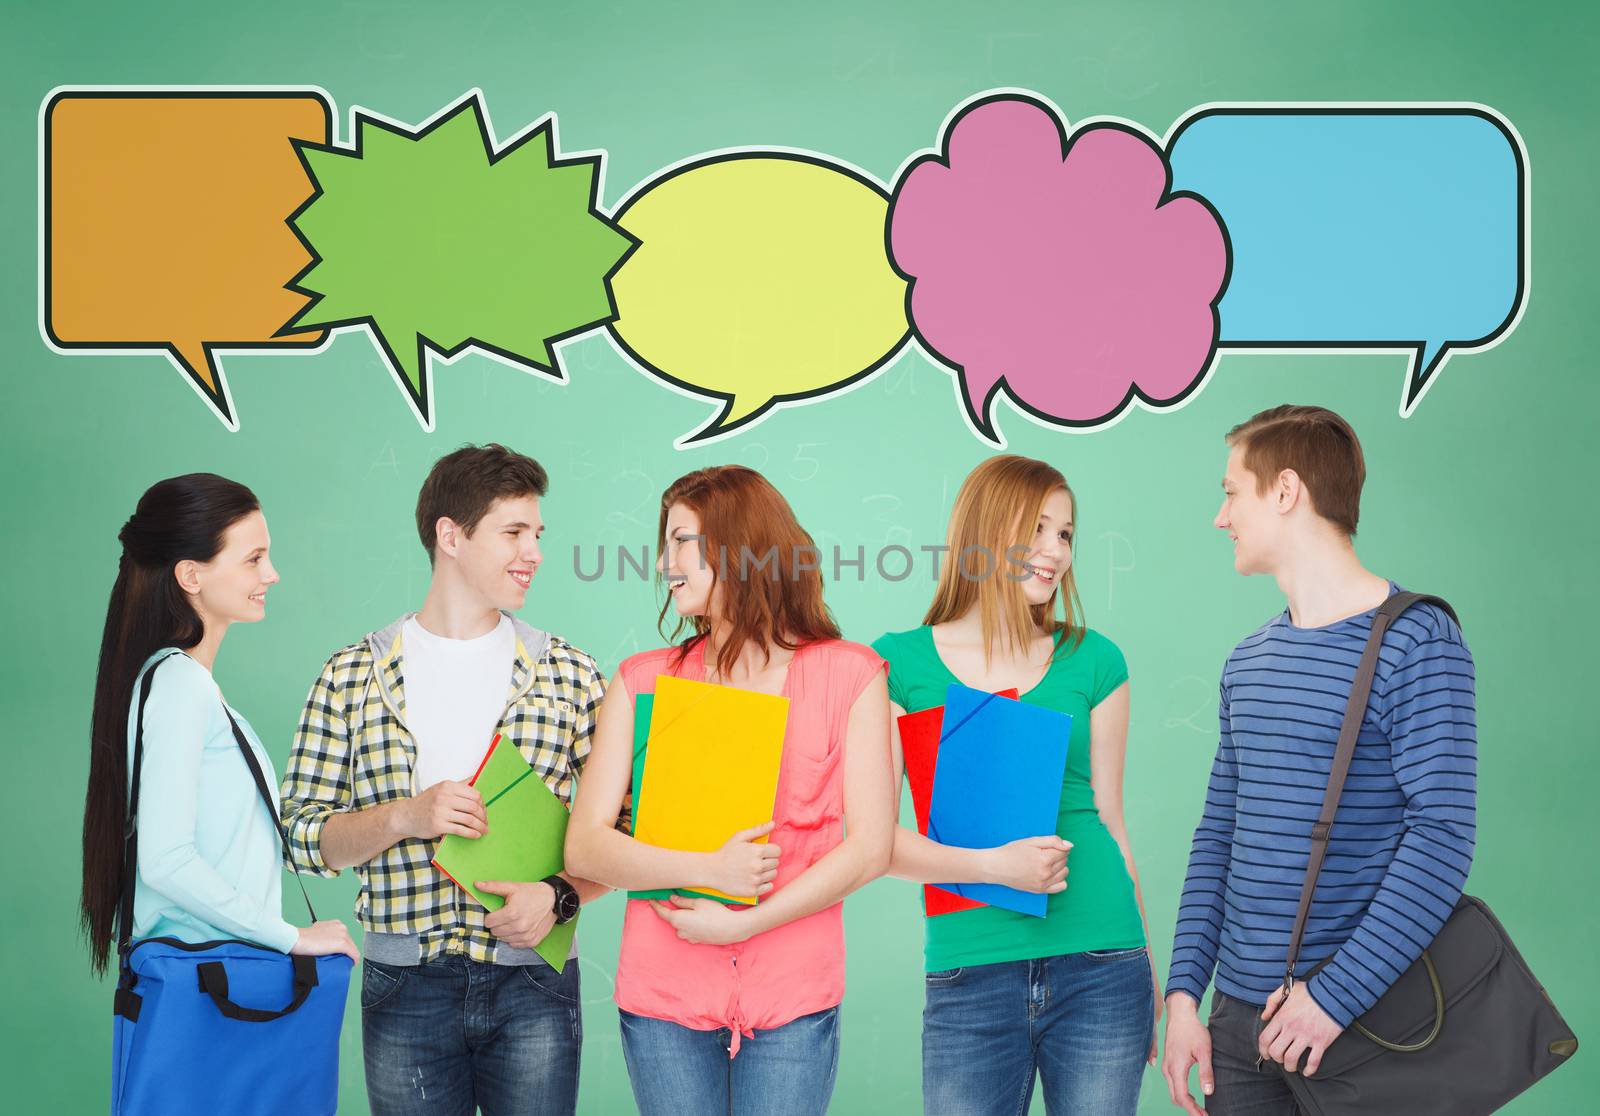 school, education, communication and people concept - group of smiling teenagers with folders and school bags talking over green board background with text bubbles